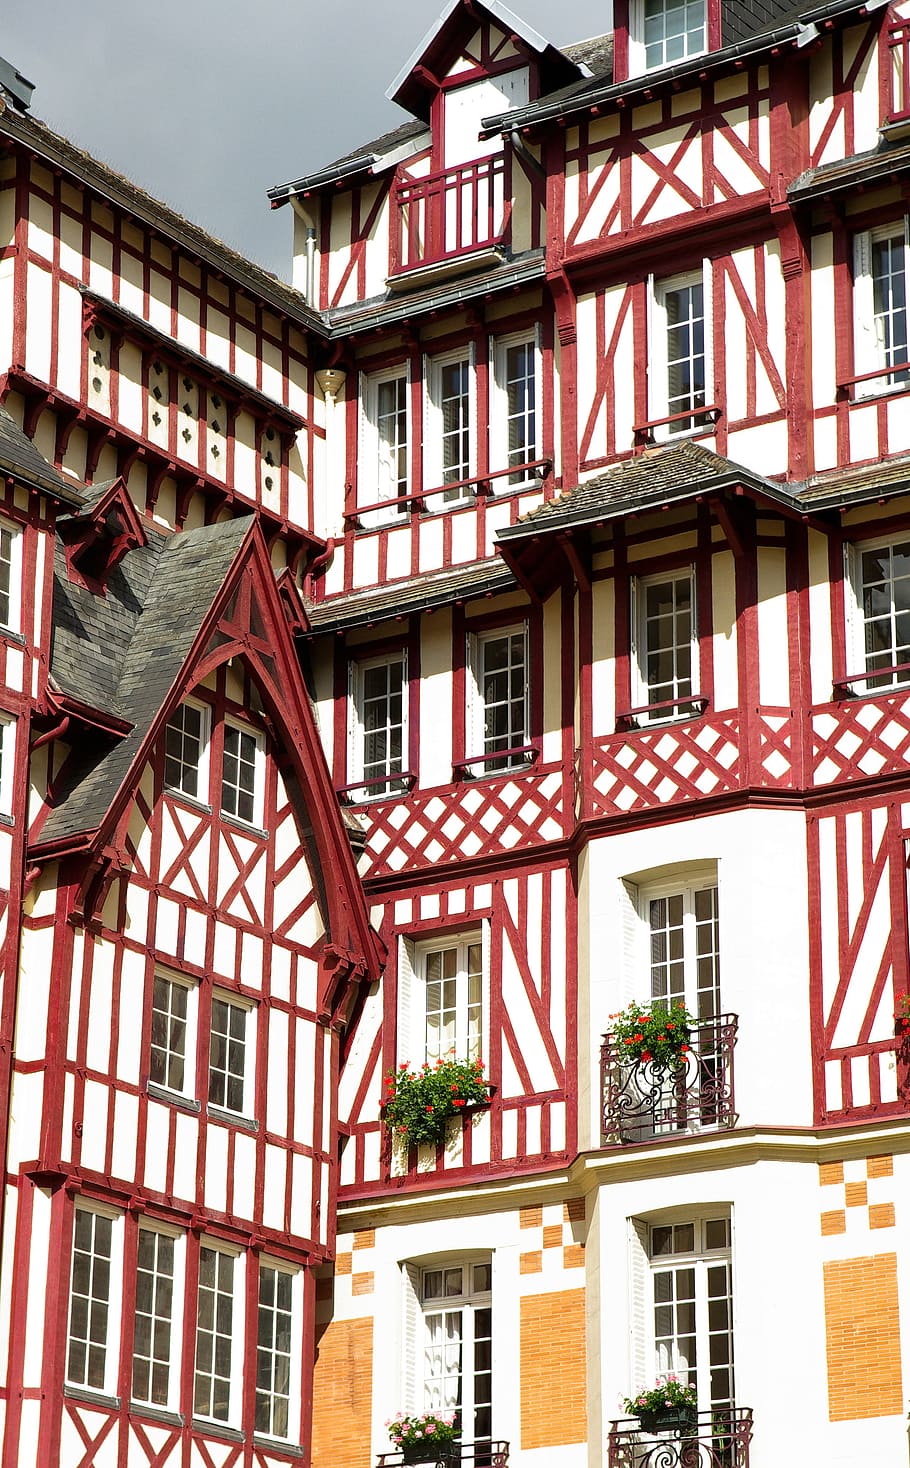 france, normandy, timbered houses, built structure, building exterior, architecture, window, building, residential district, low angle view